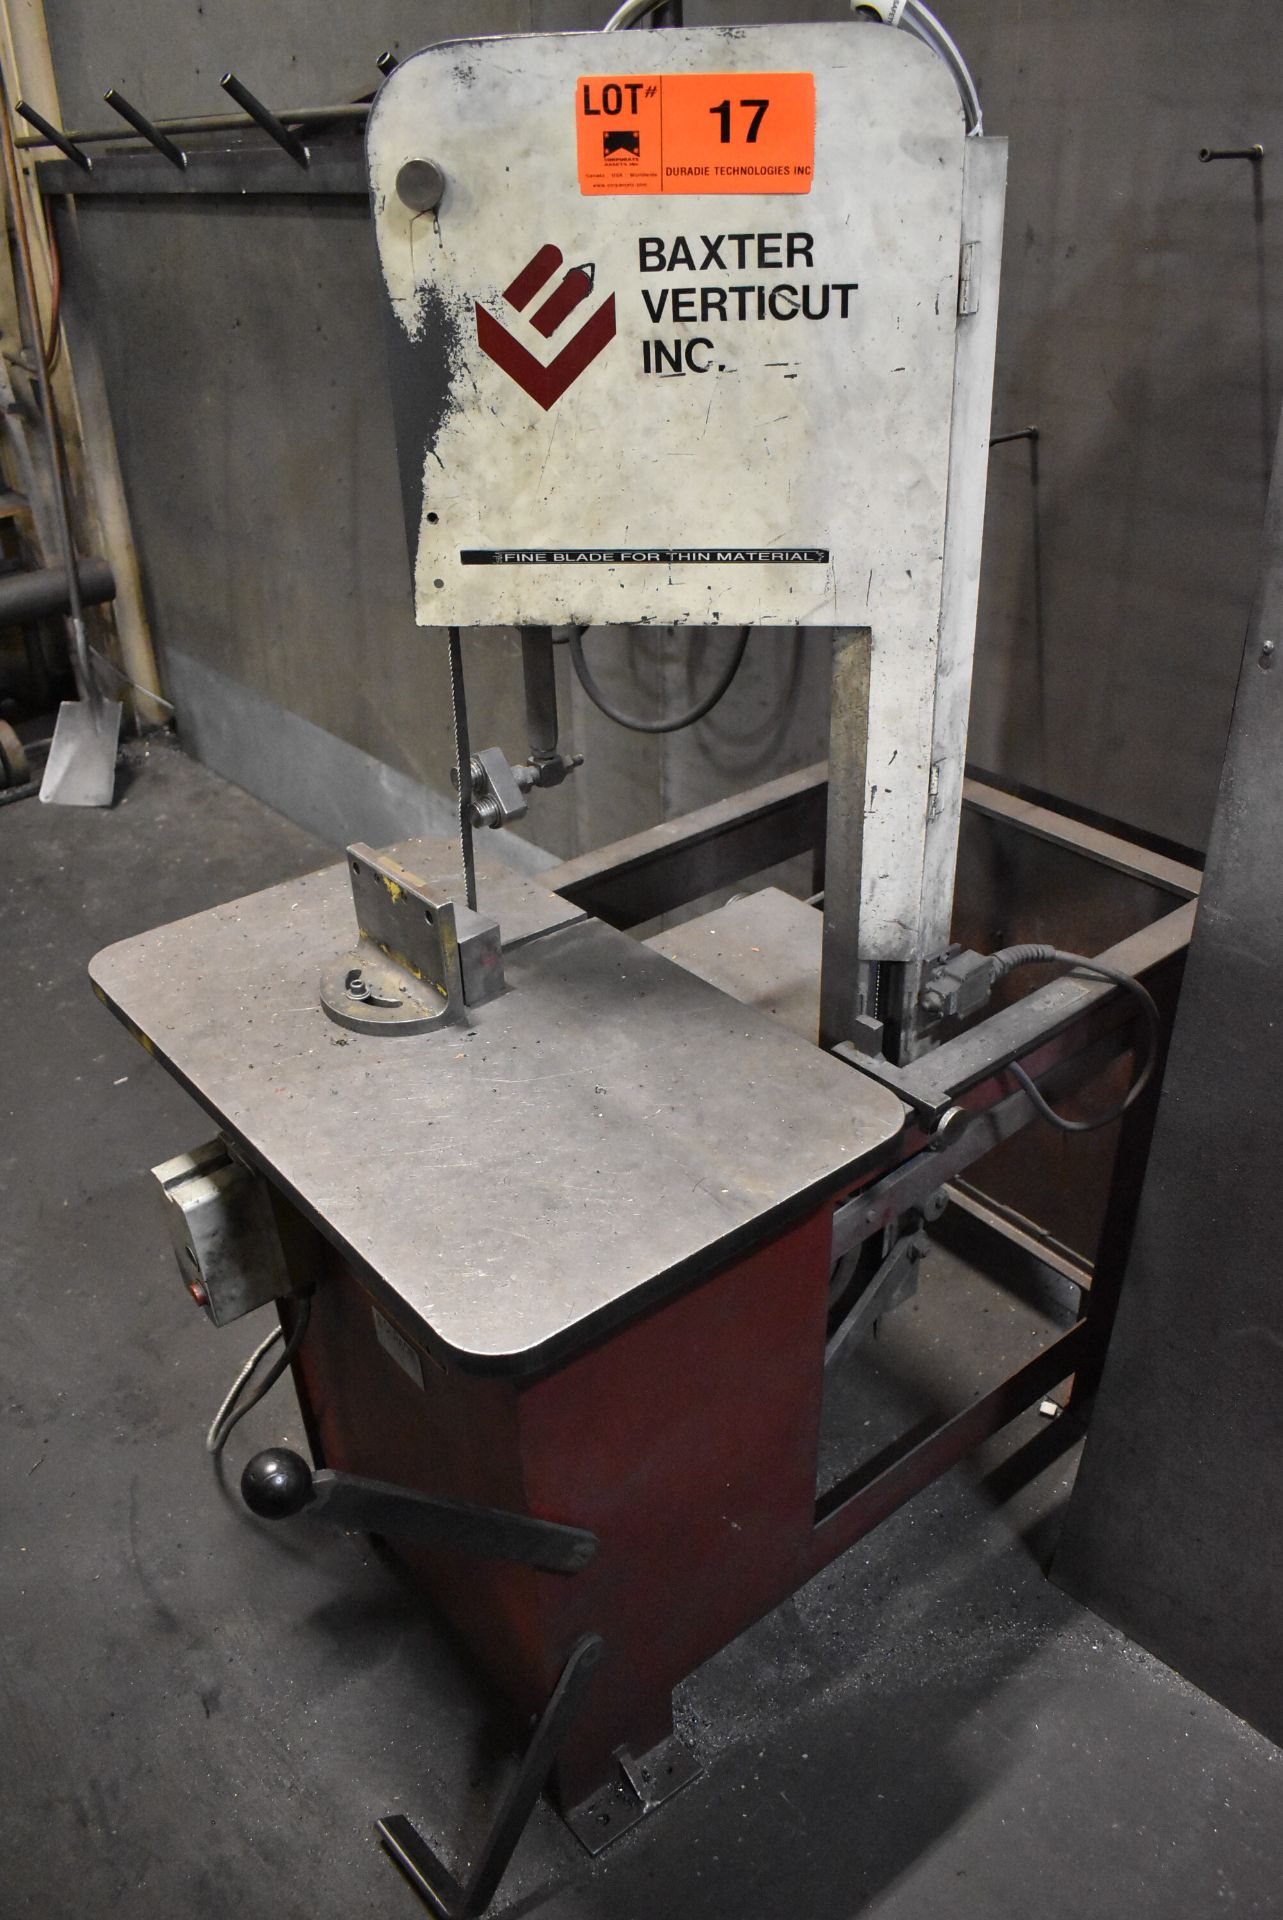 BAXTER VERTICUT 1153 ROLL-IN TYPE VERTICAL BAND SAW WITH 30" X 18" TABLE, 13" THROAT, 3/4 HP